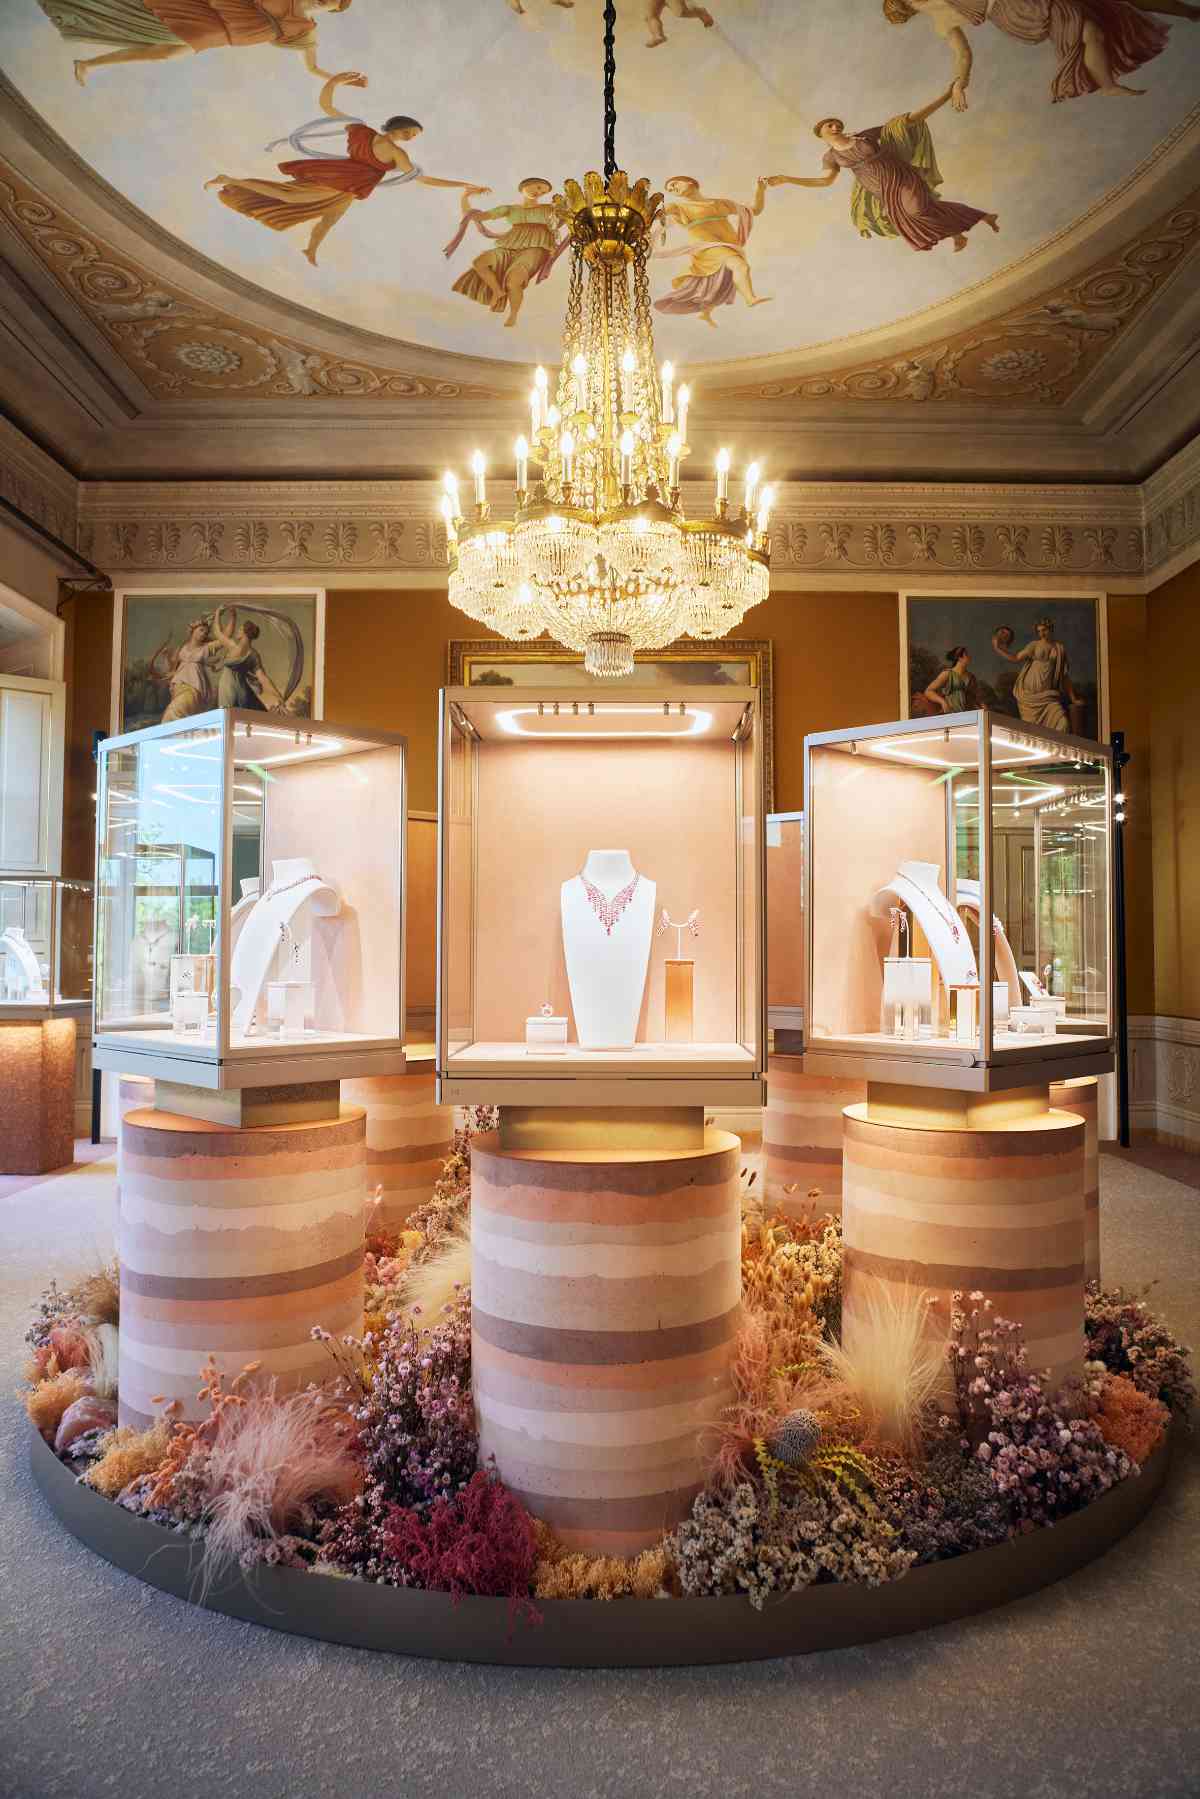 Cartier Unveiled Its New High Jewellery Collection “Le Voyage Recommencé” In Florence